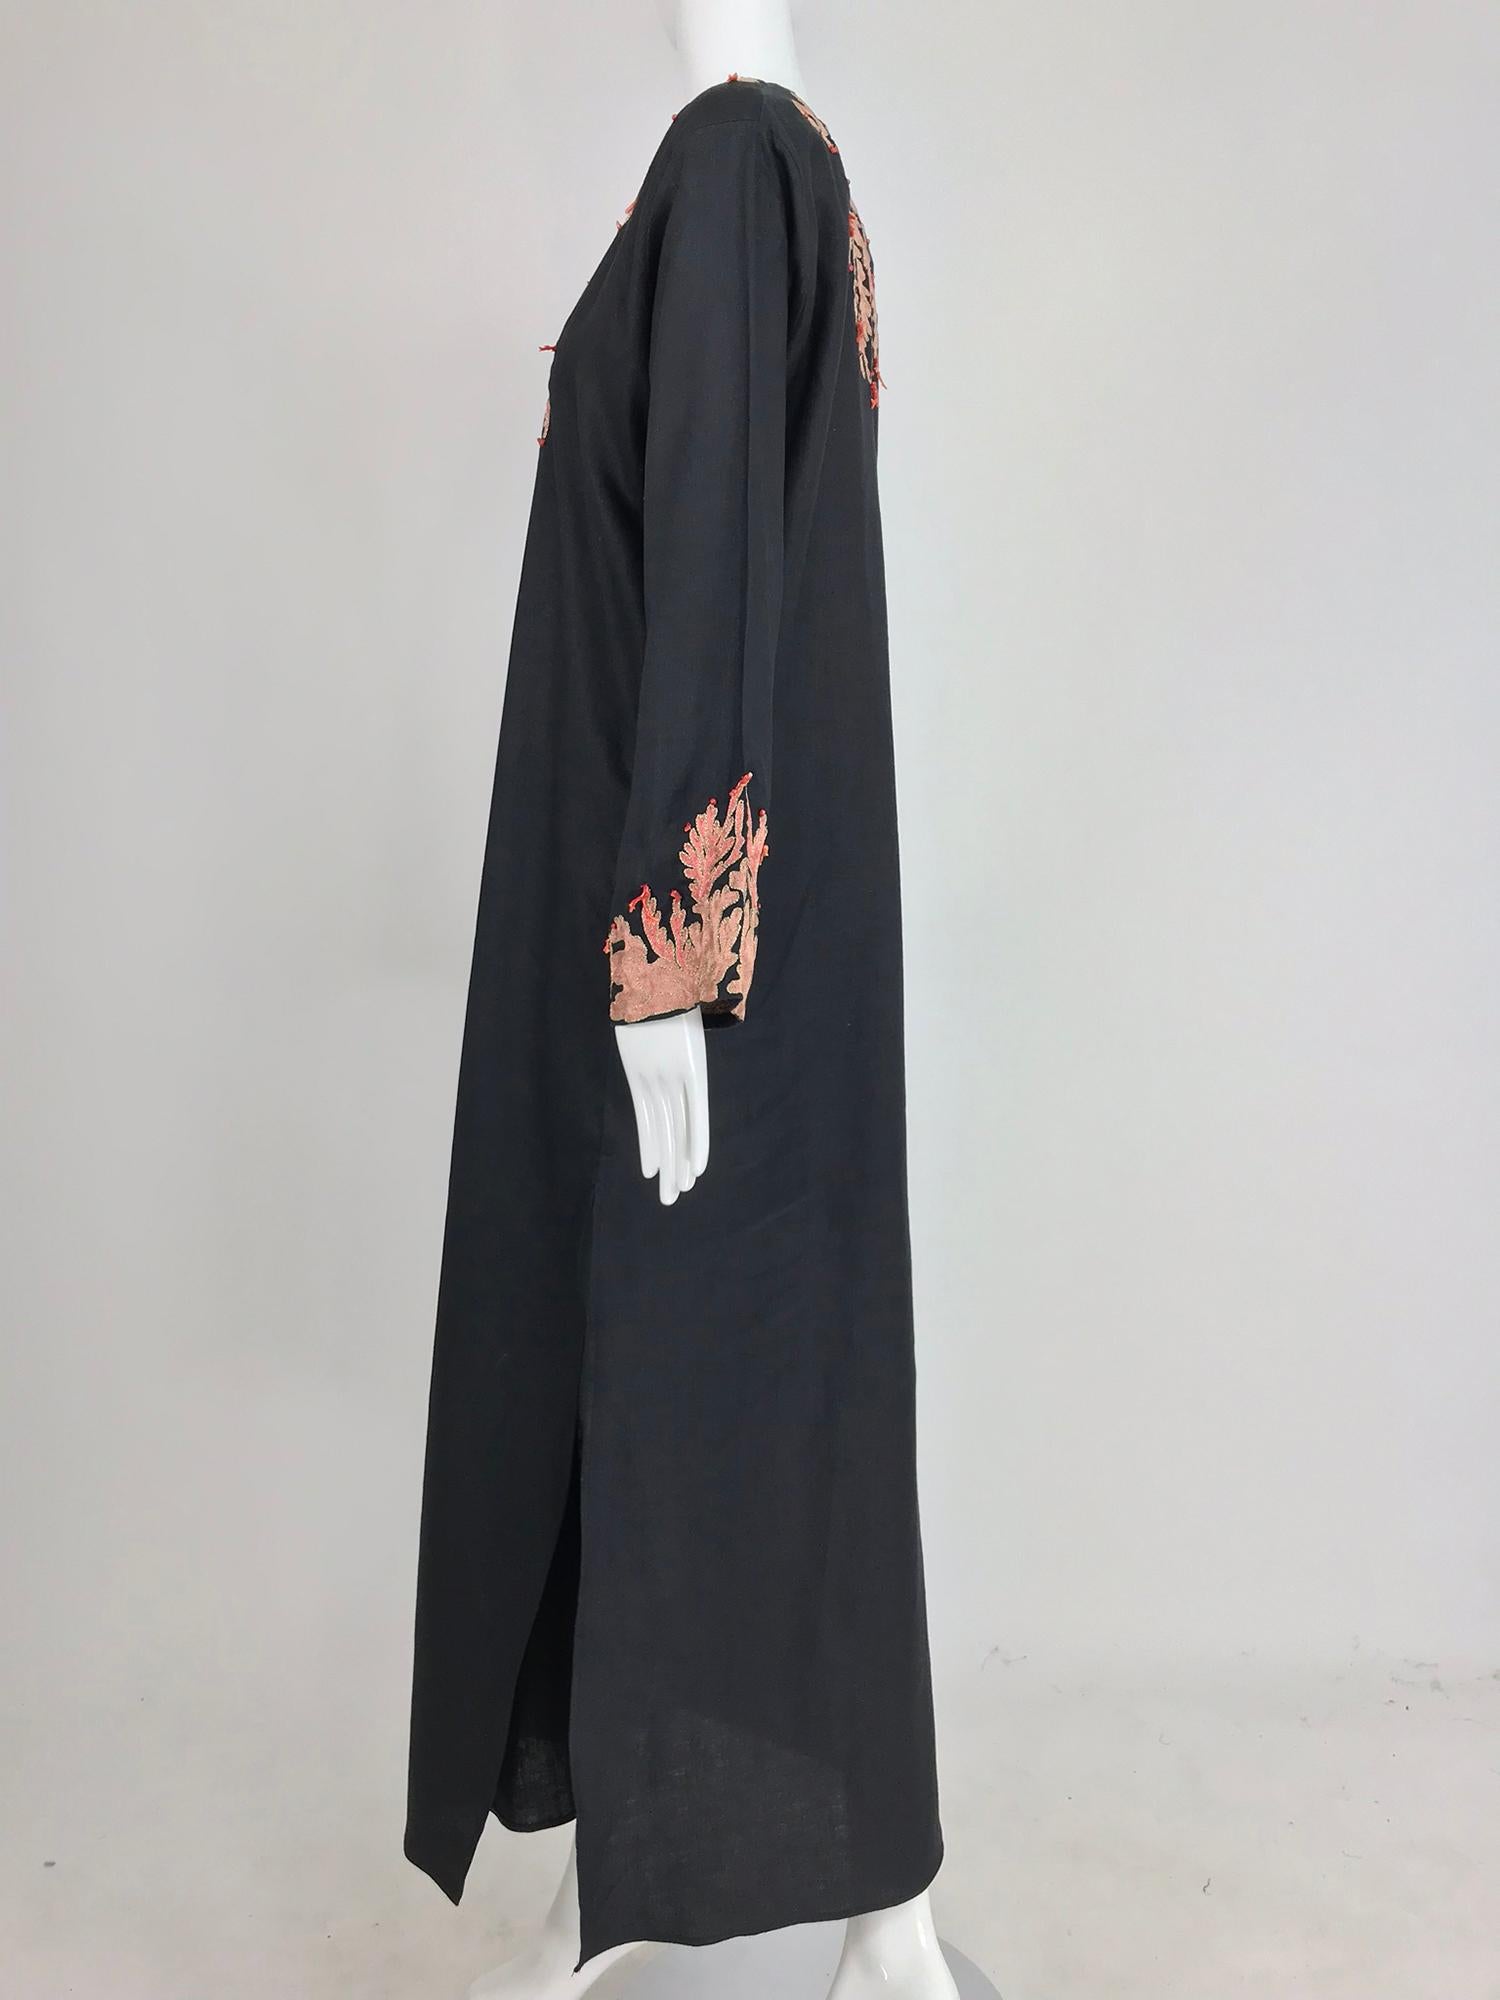 Jeannie McQueeny coral embroidered black linen caftan  4